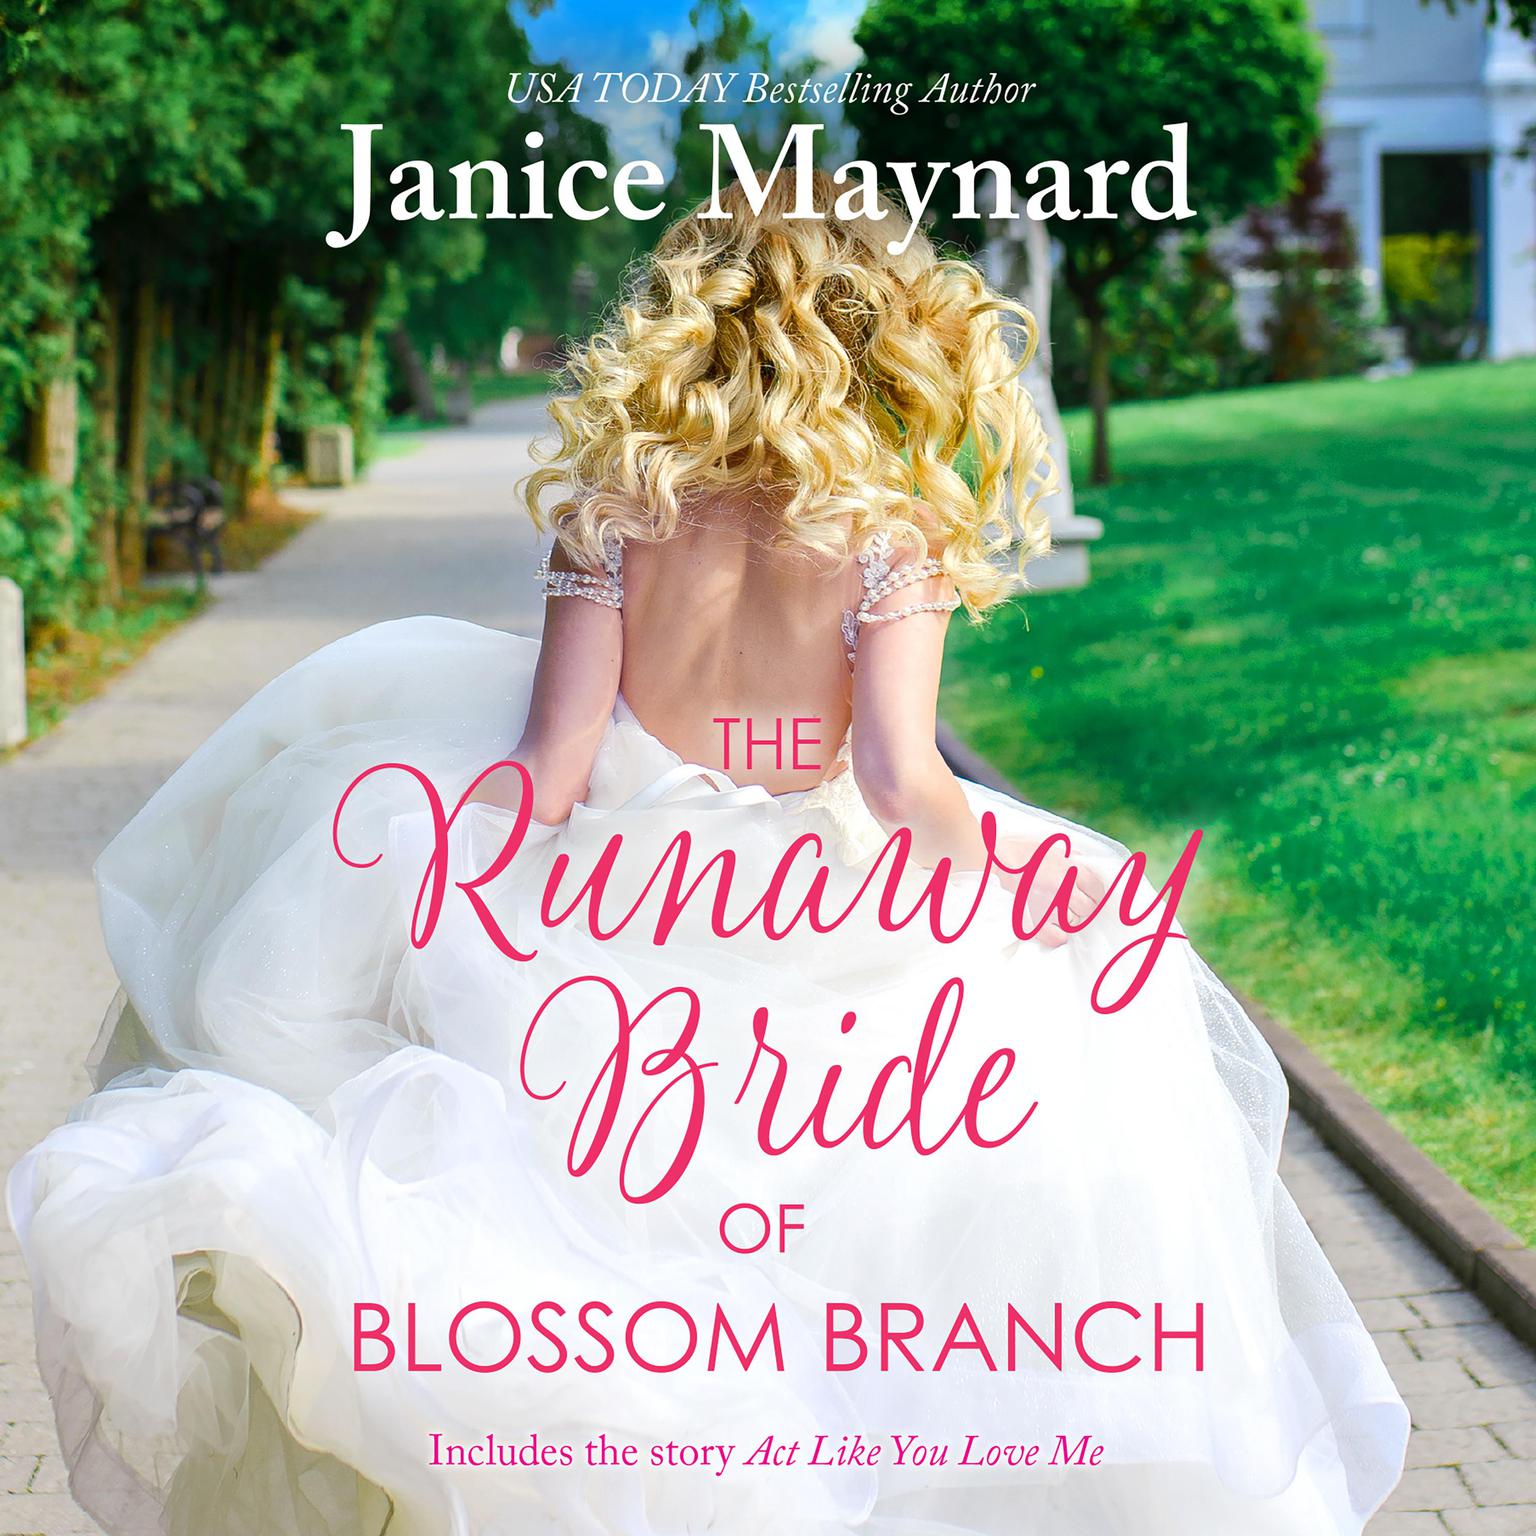 The Runaway Bride of Blossom Branch/Act Like You Love Me Audiobook, by Janice Maynard